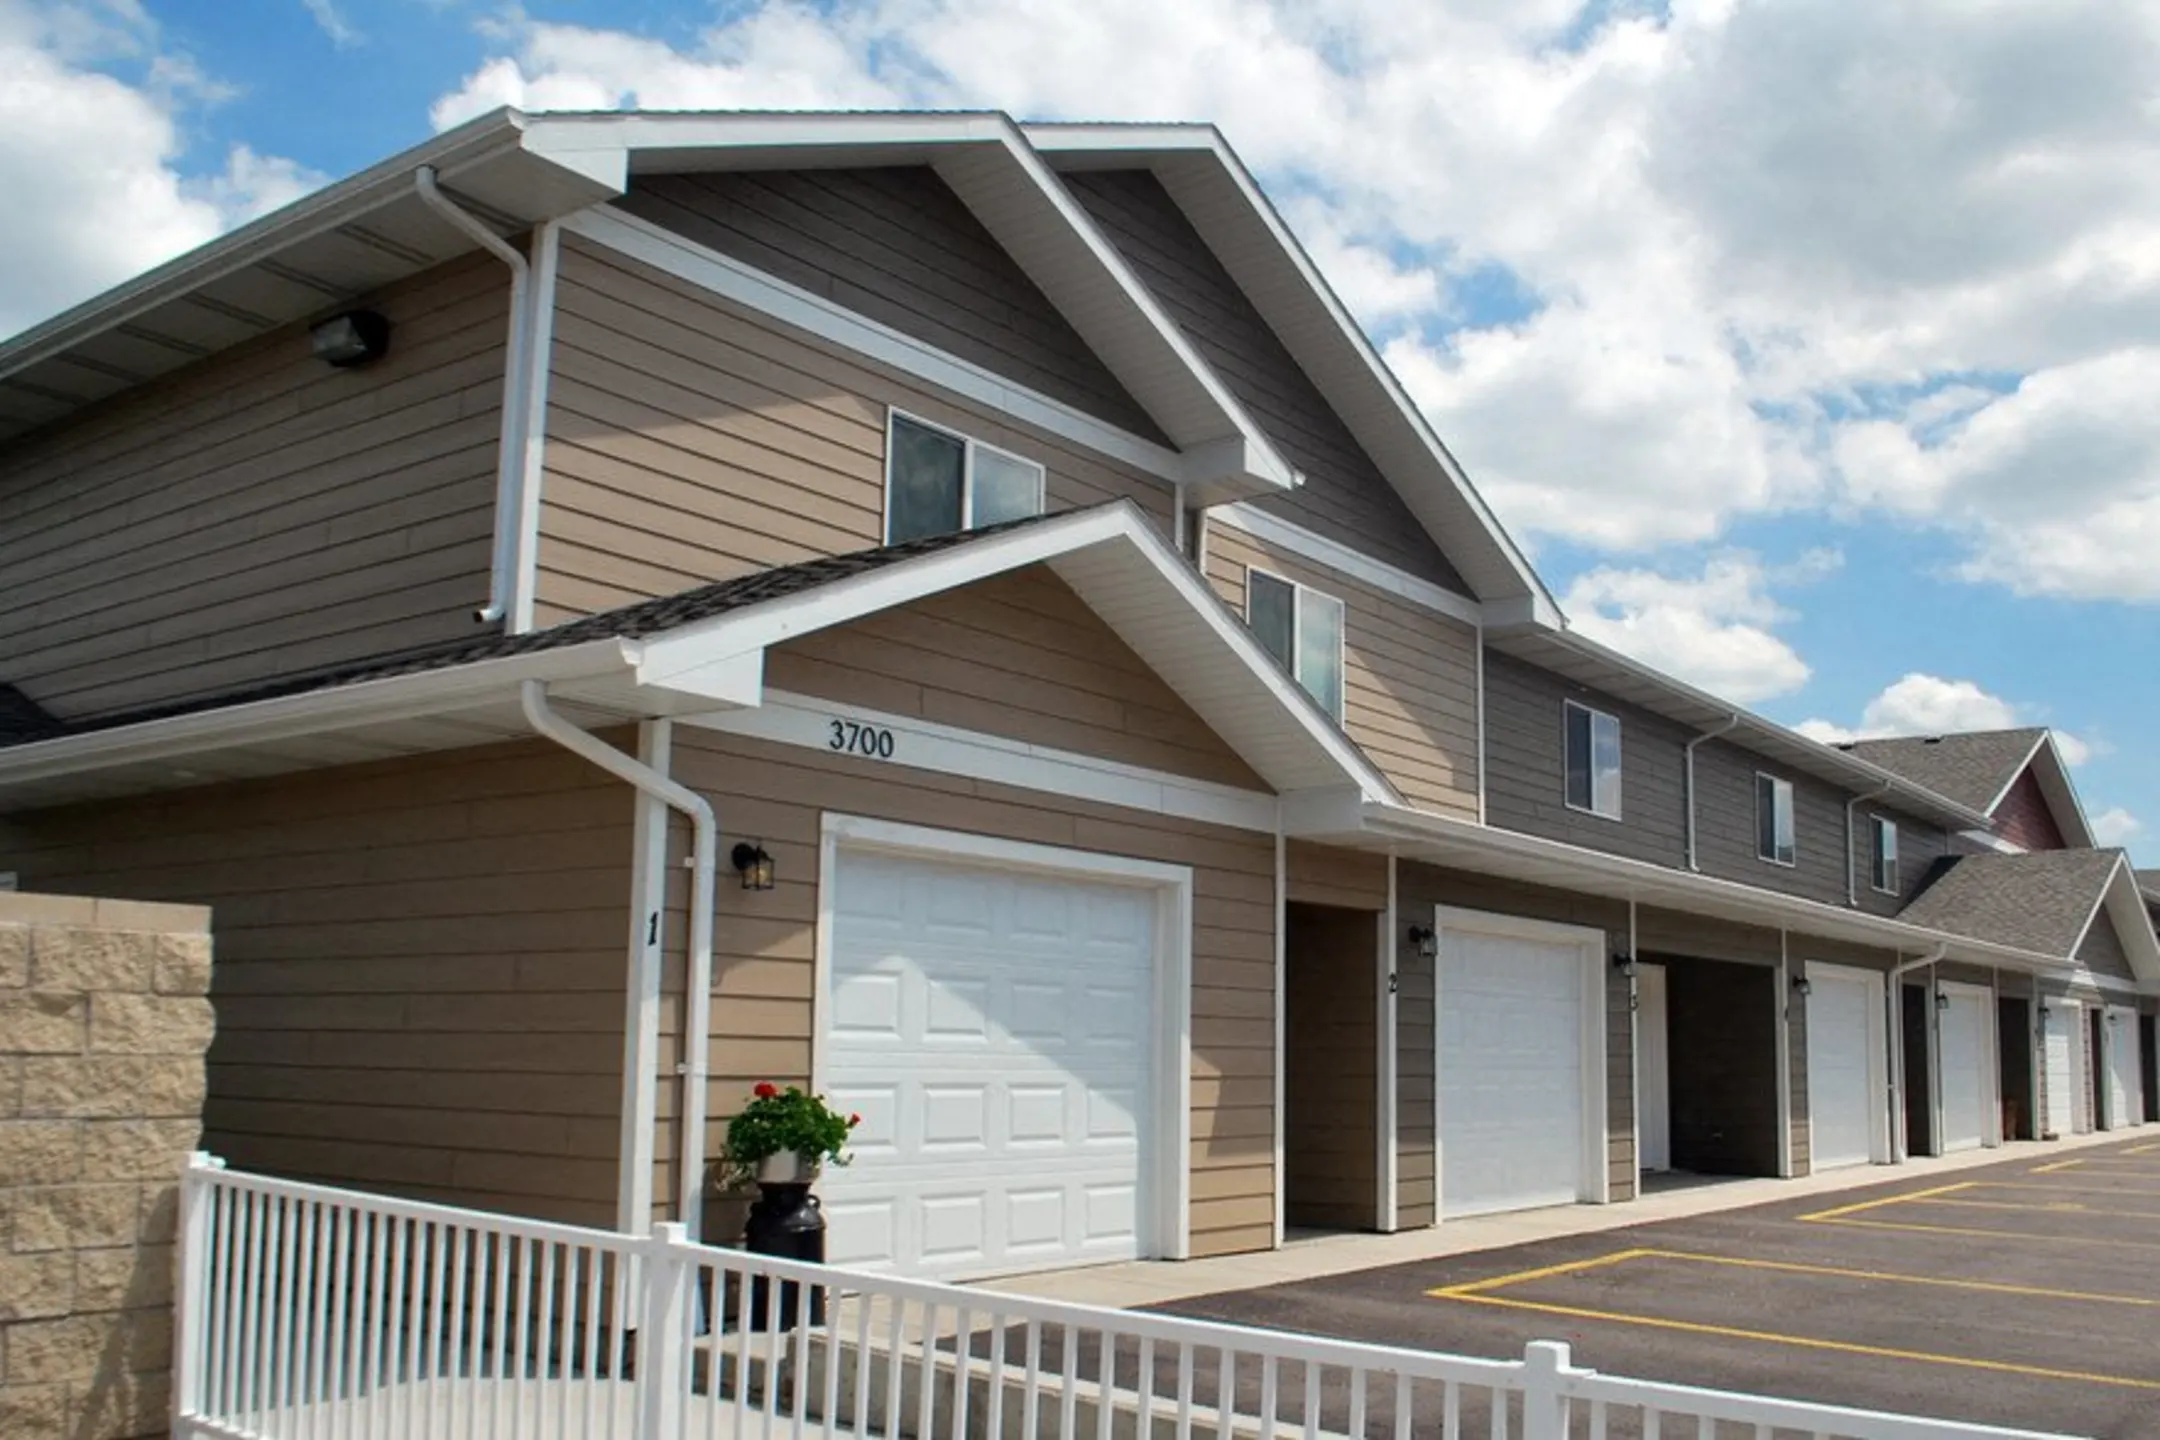 Building - Benson Village Townhomes - Sioux Falls, SD